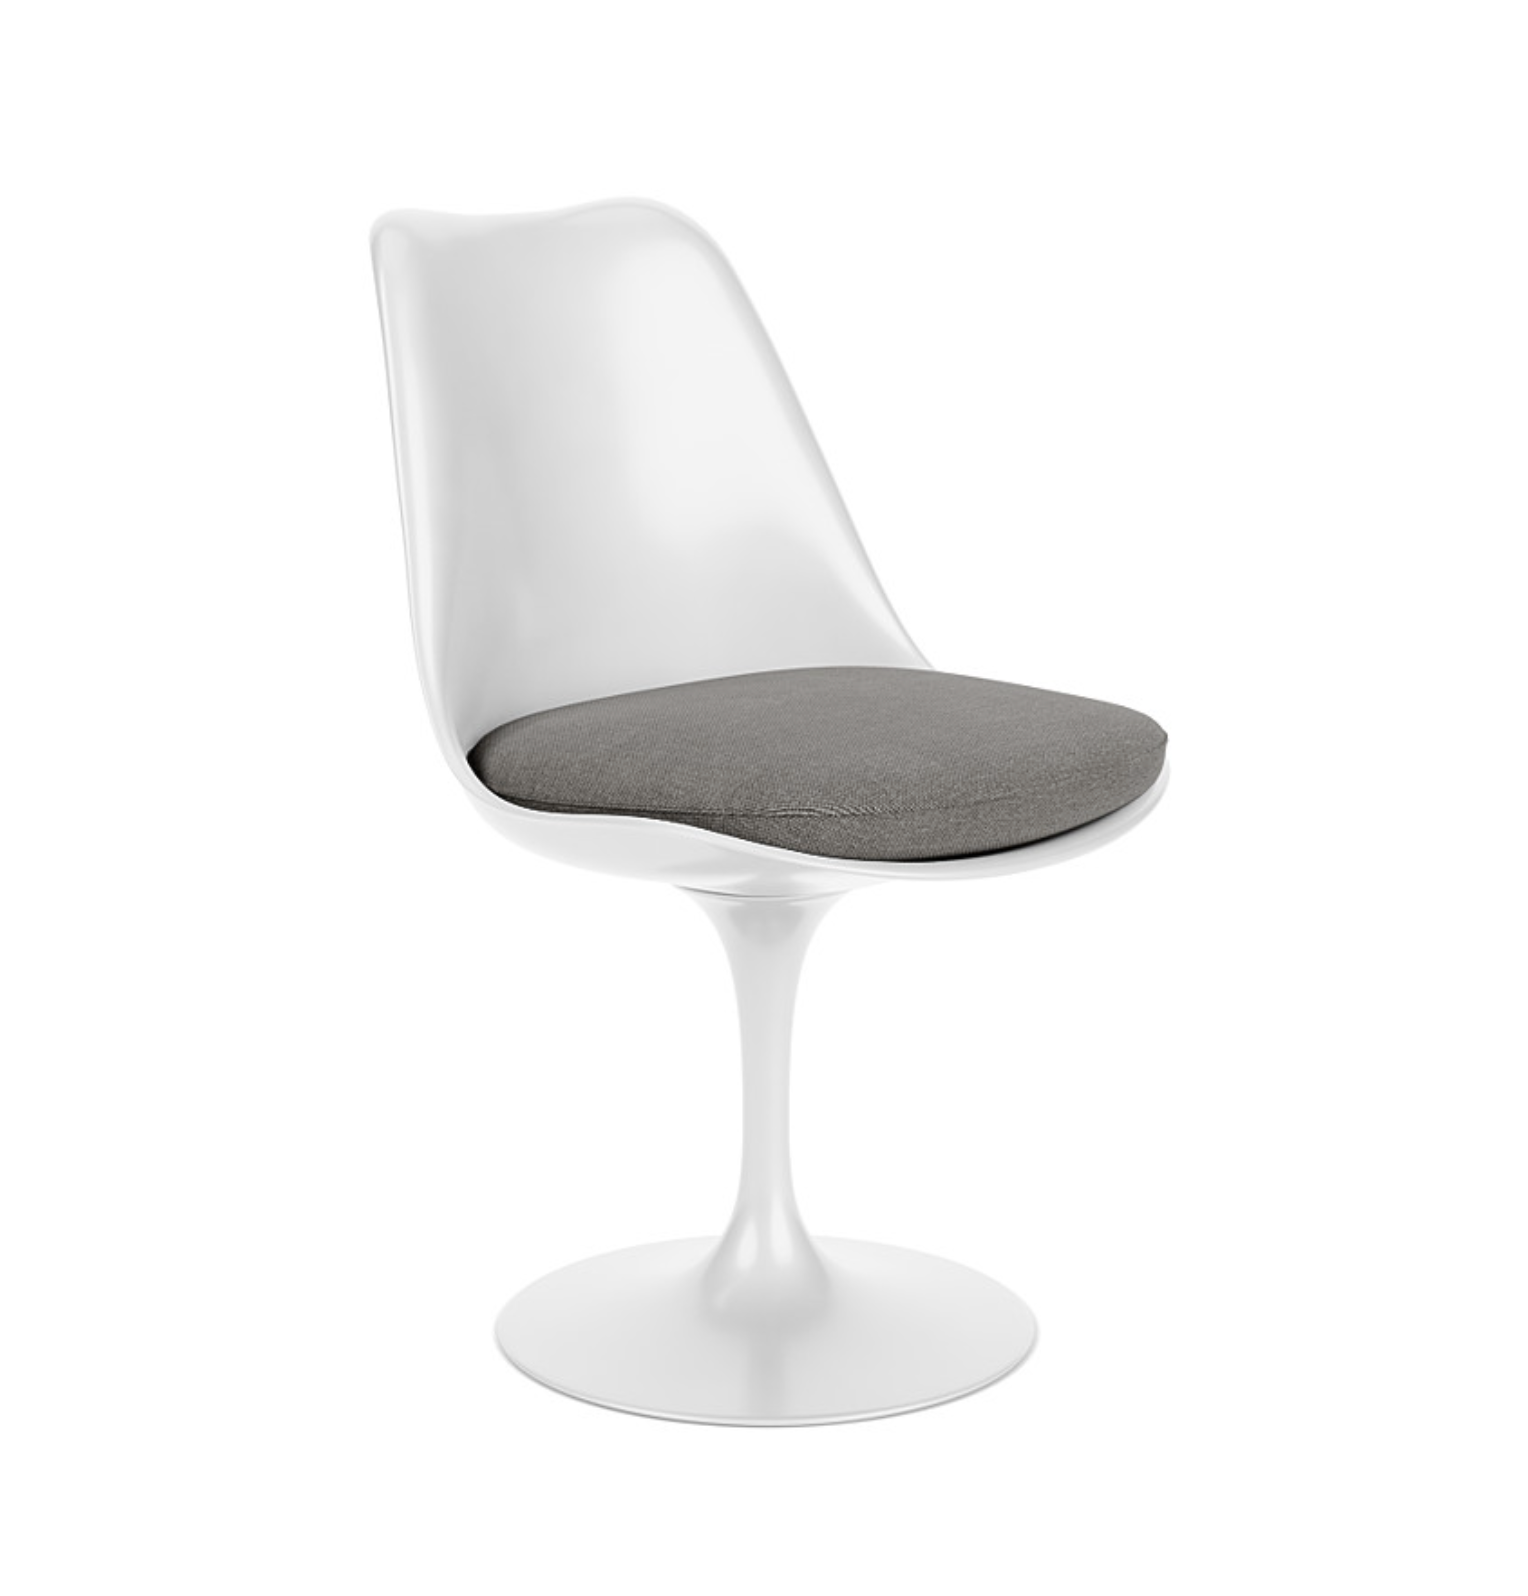 Clearance - Set of 4 White Tulip Chairs / Tonus Seat Pads by Knoll